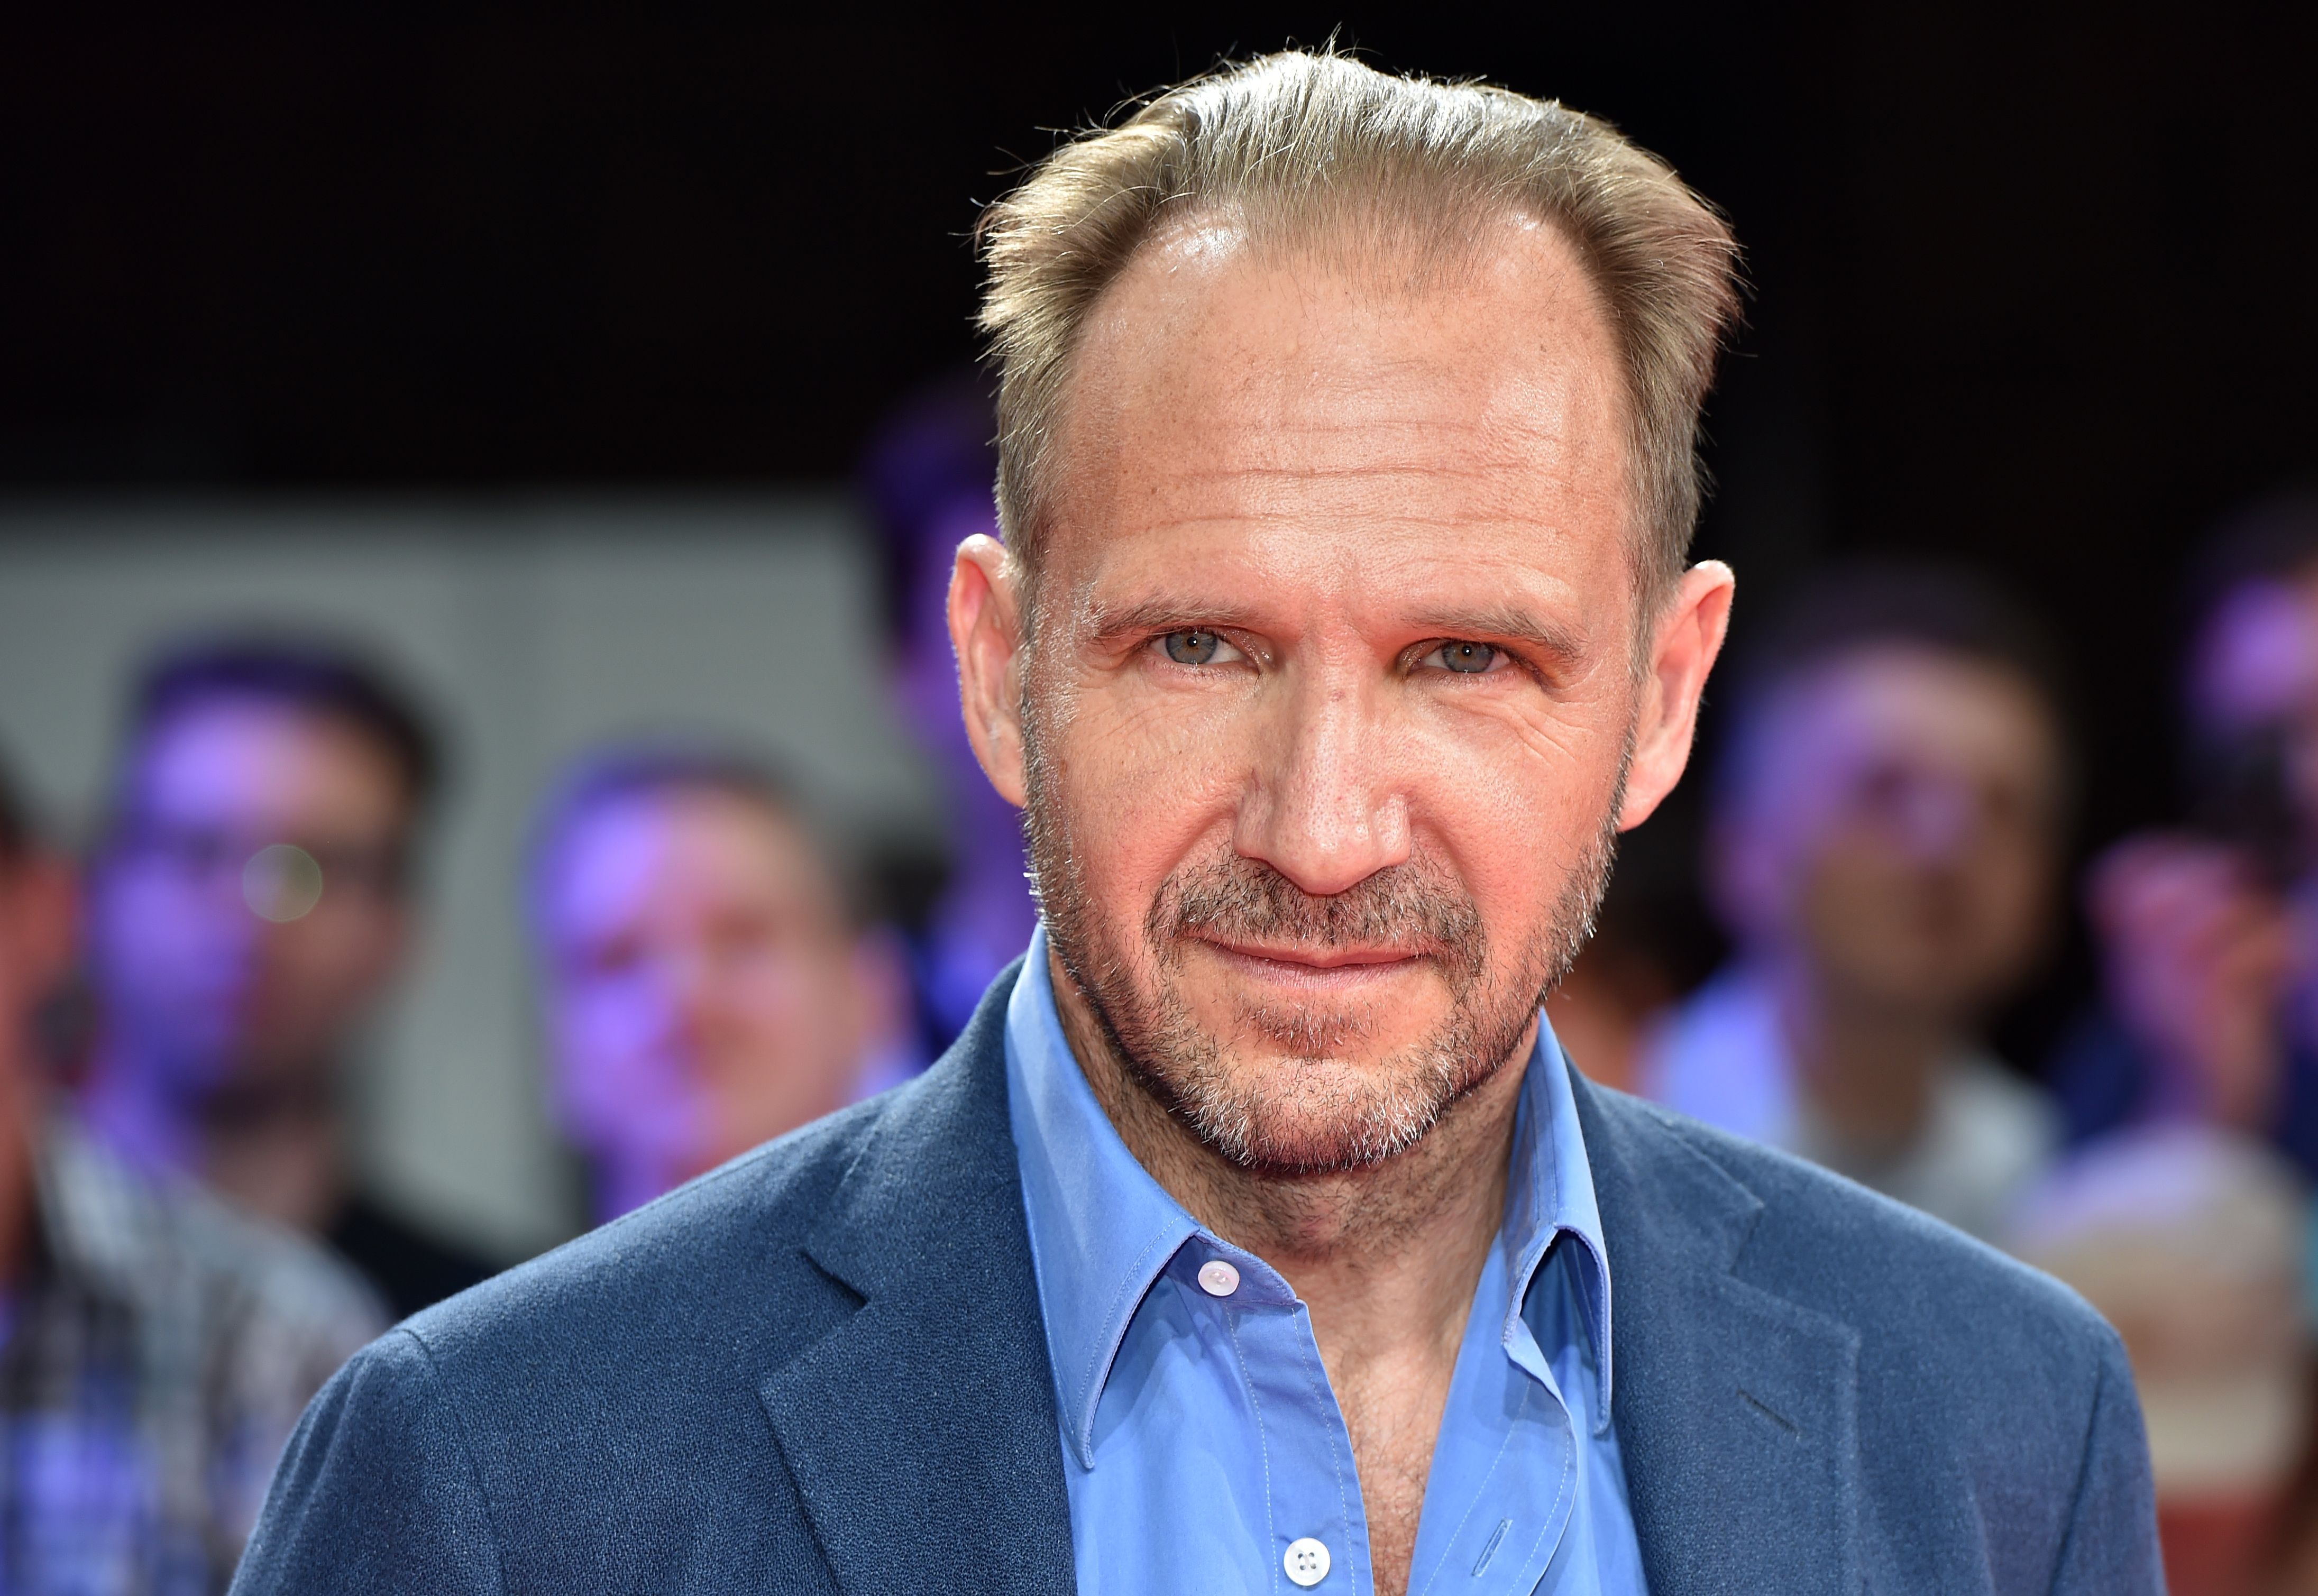 Ralph Fiennes at the Munich Film Festival in 2019 in Munich, Germany | Source: Getty Images